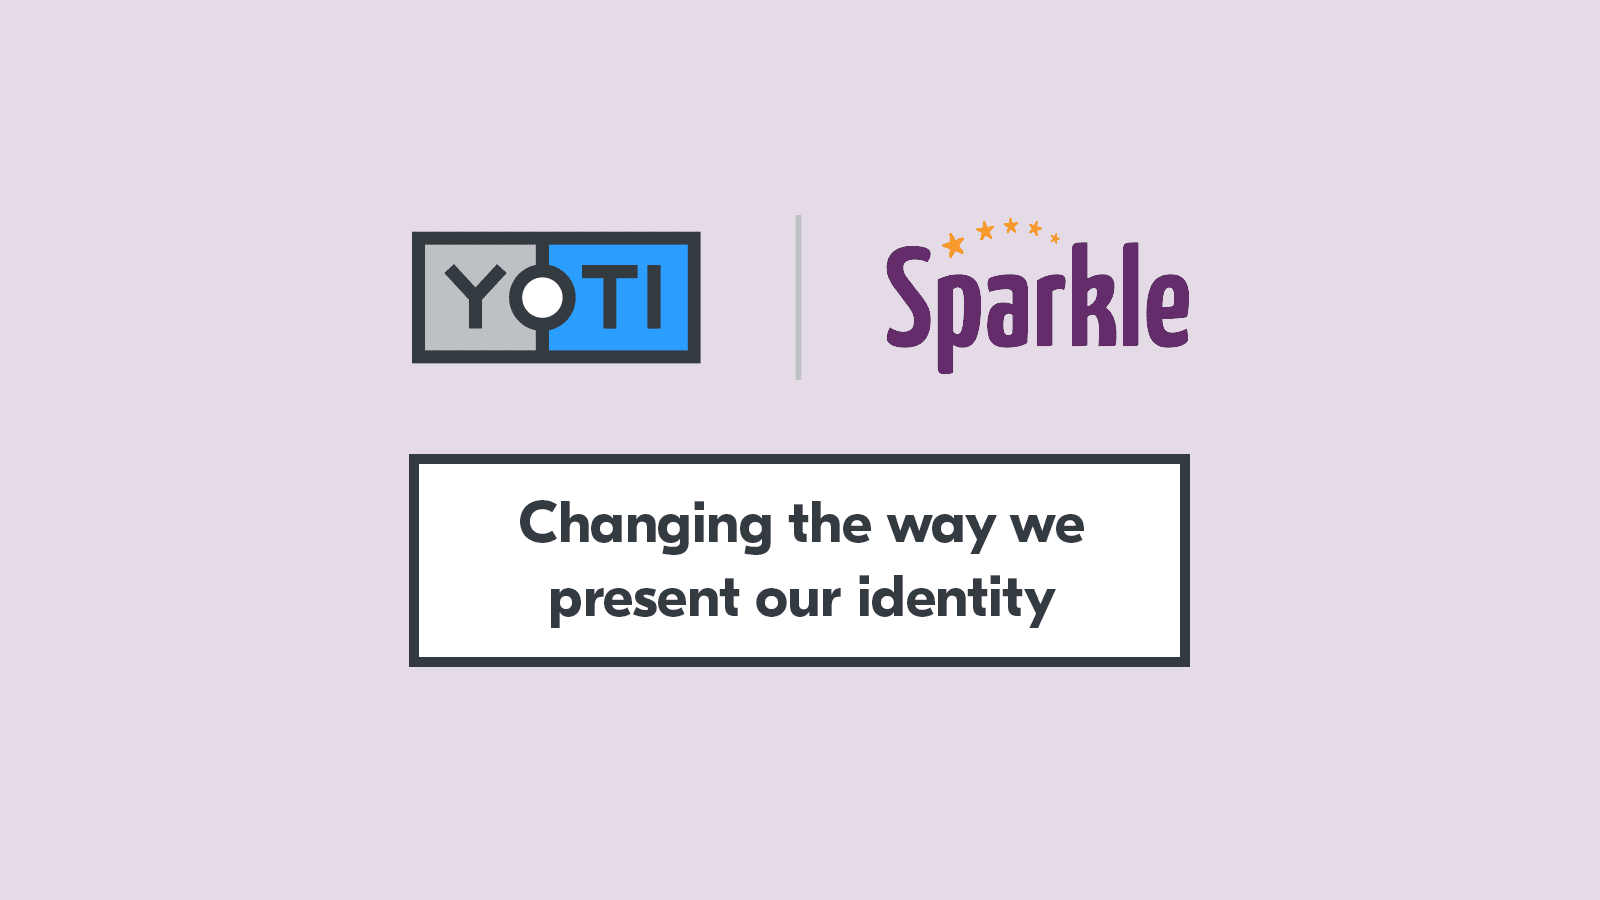 Yoti is partnering with Sparkle, the national transgender charity in the UK